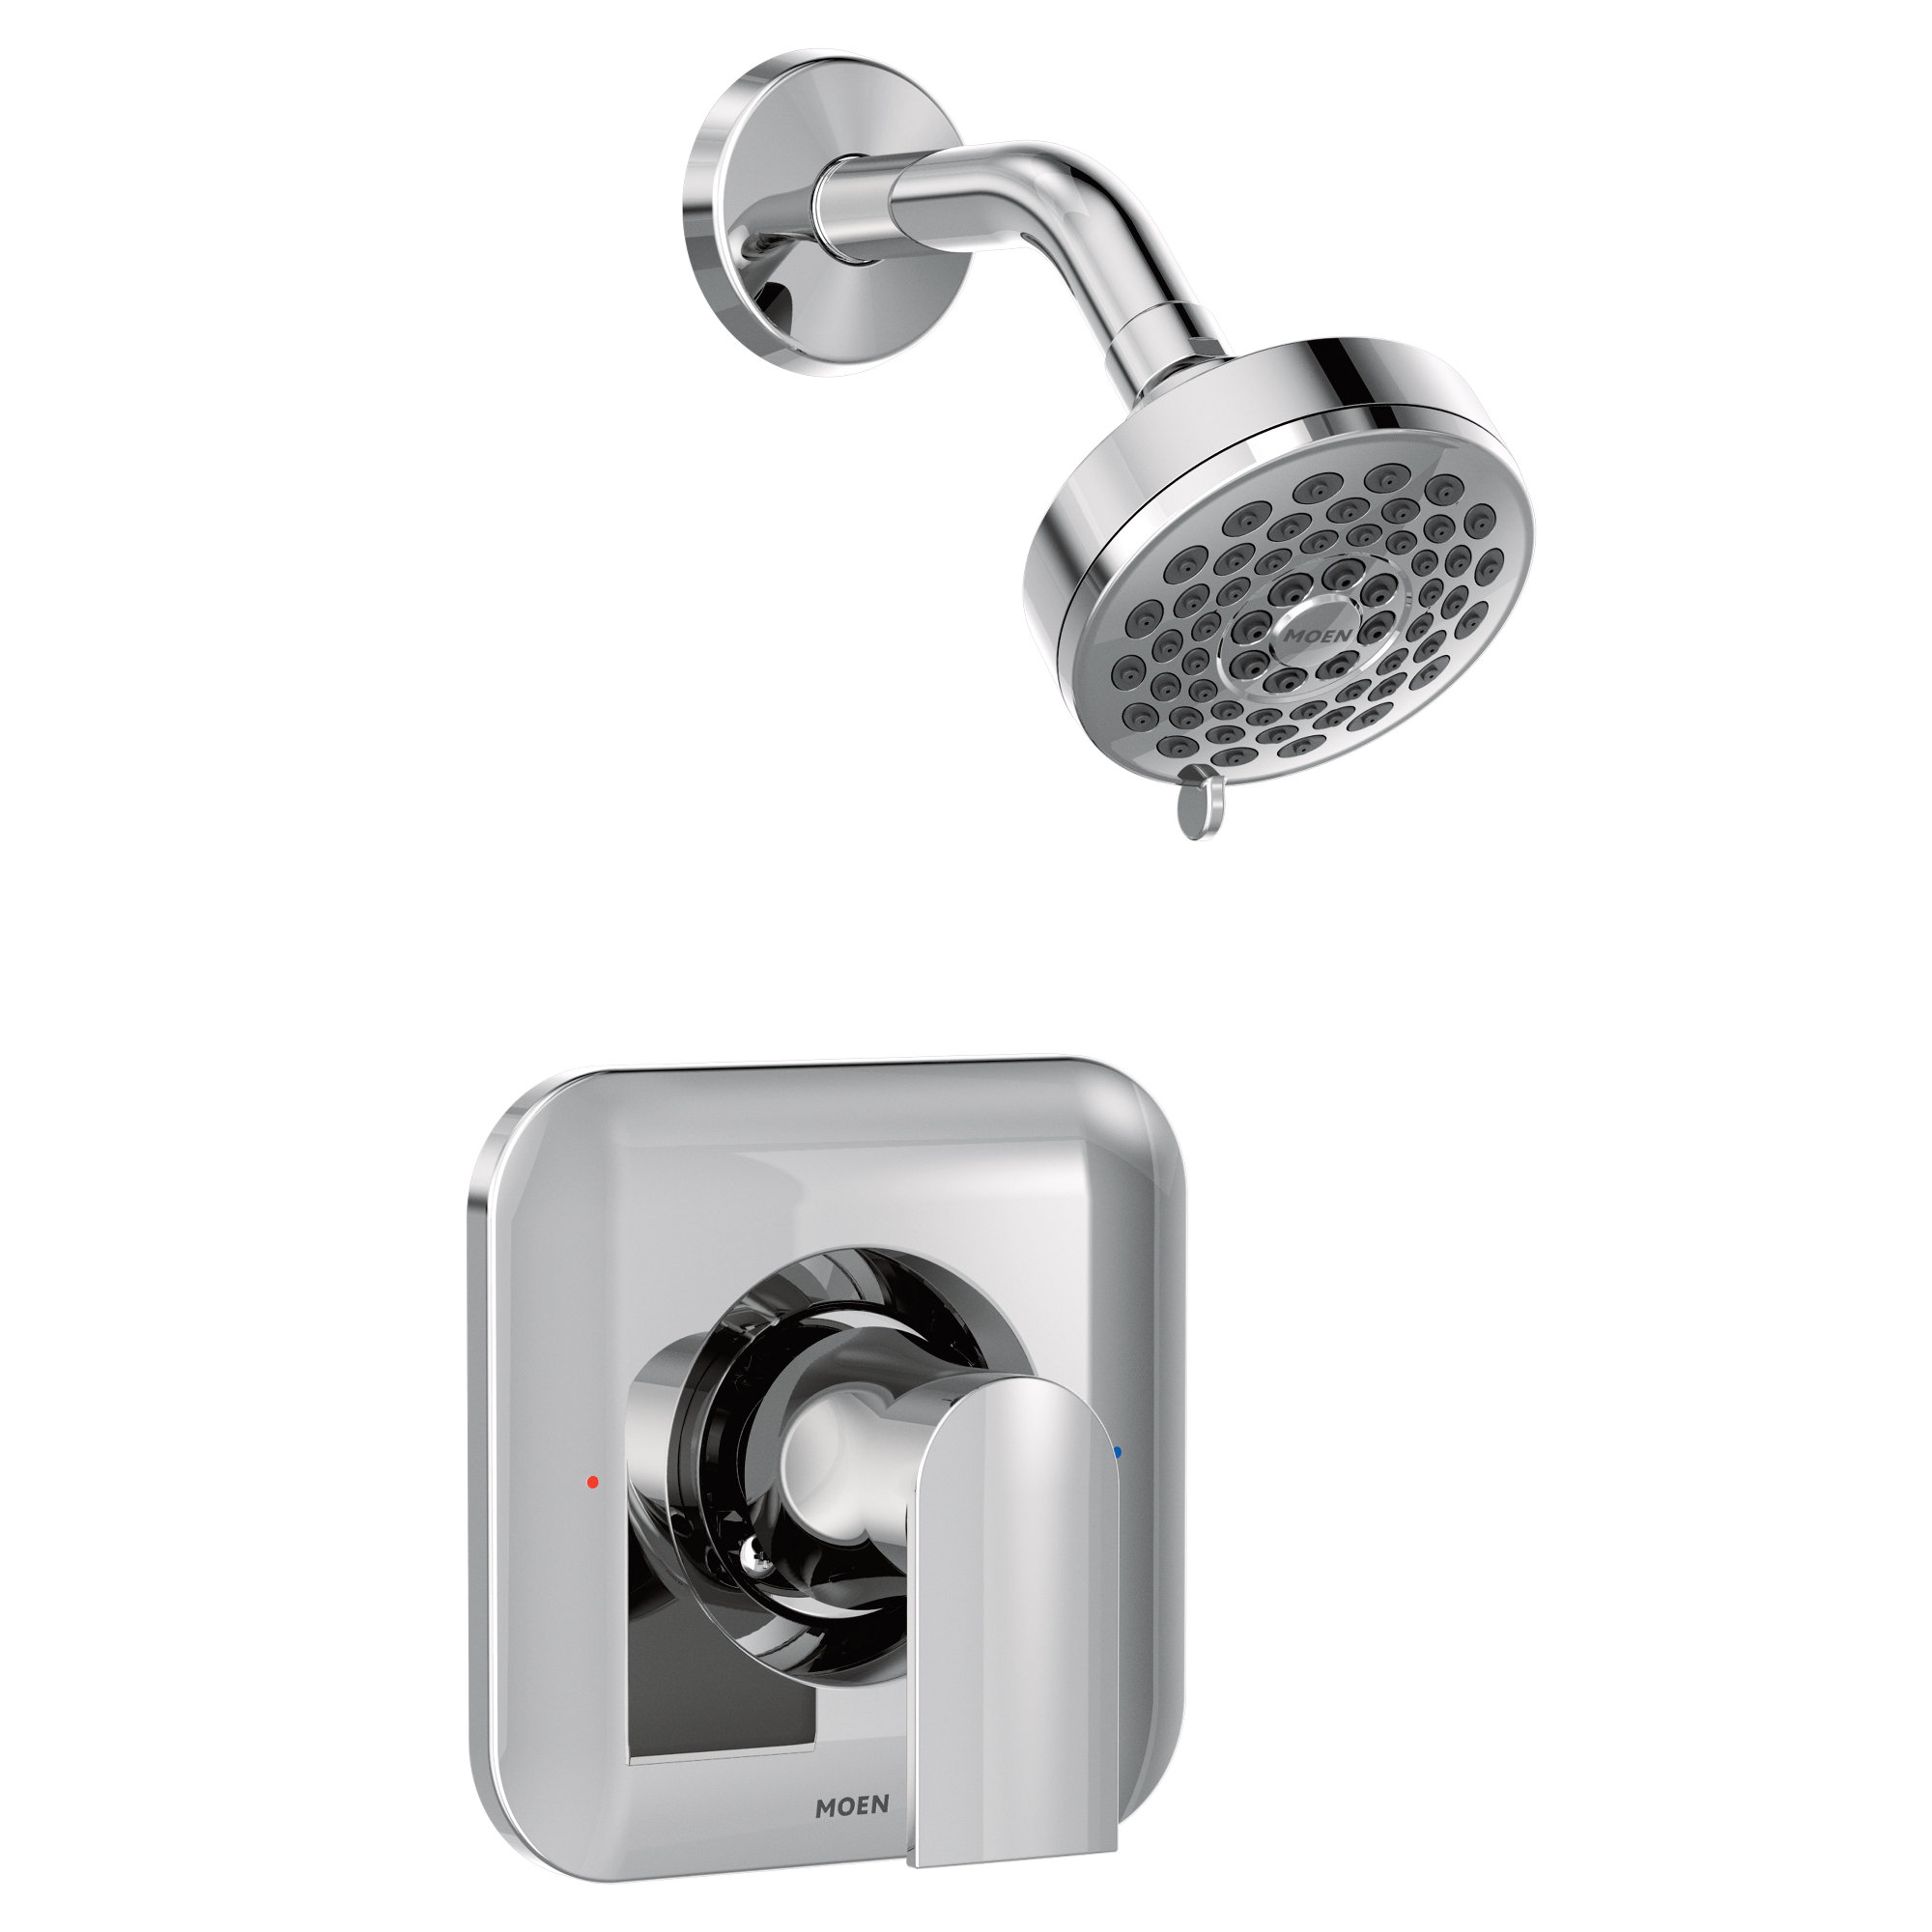 Genta Shower Faucet Lever Handle With Posi Temp Reviews Allmodern